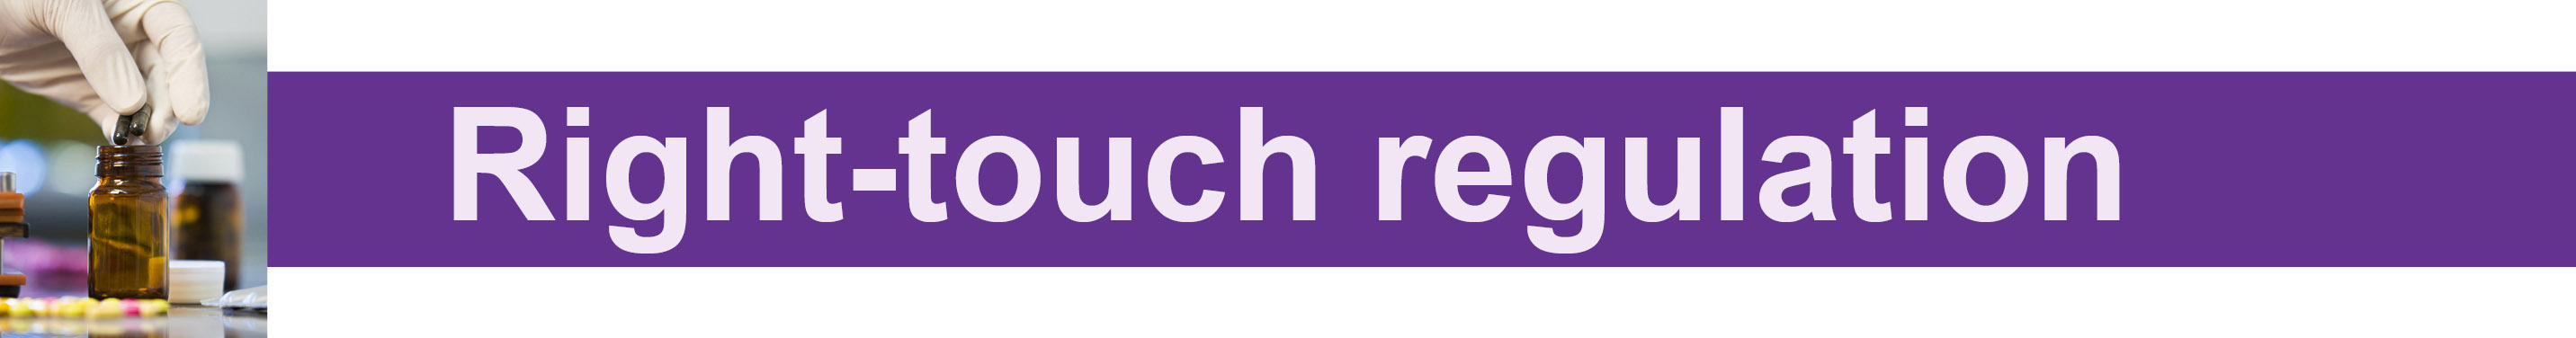 Right touch regulation banner